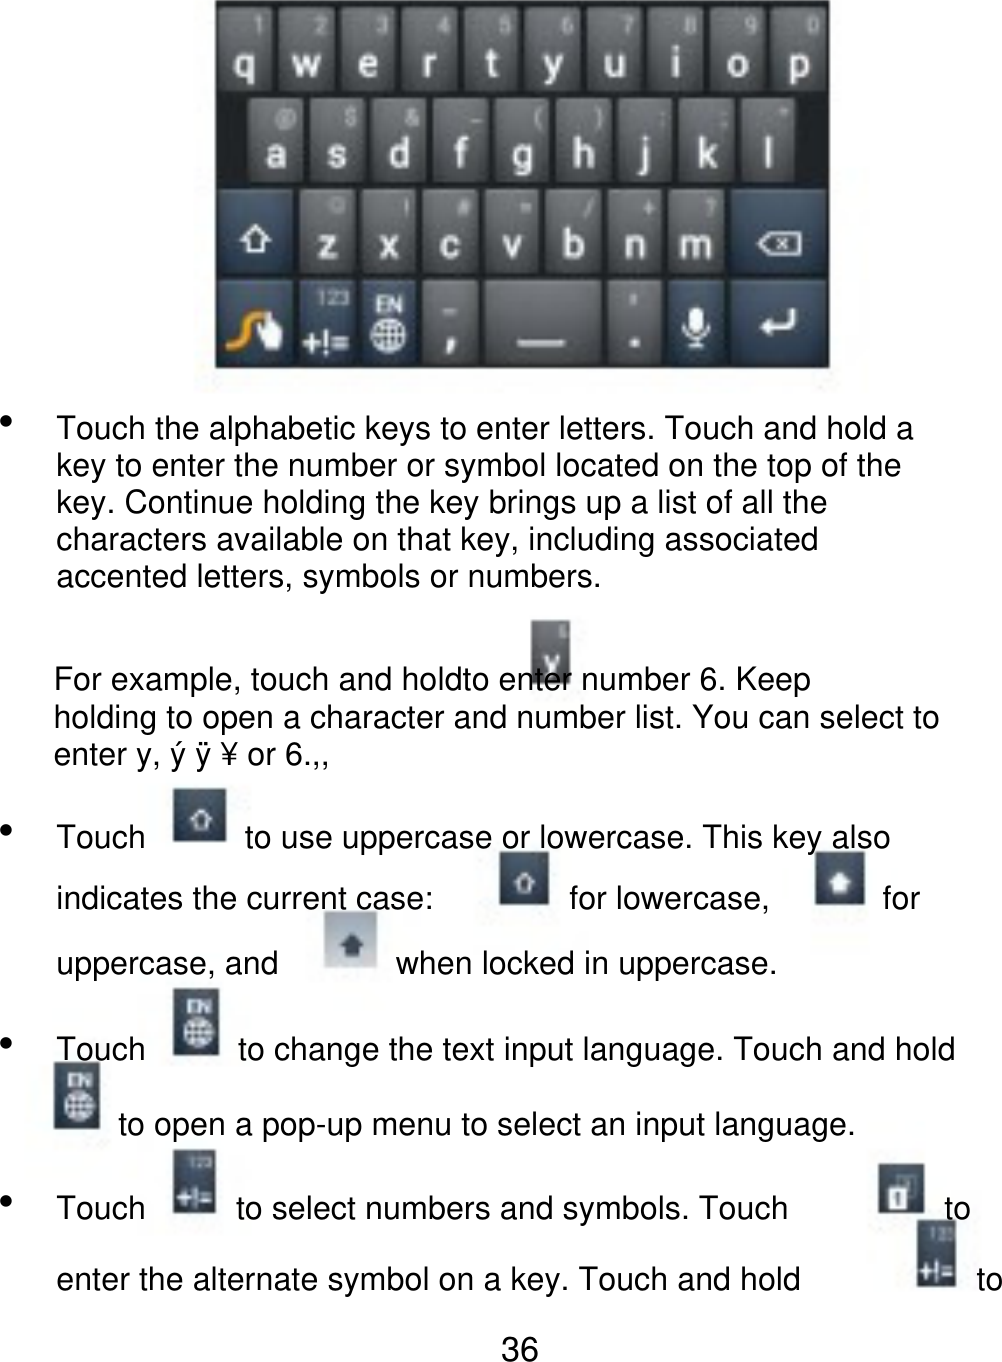  Touch the alphabetic keys to enter letters. Touch and hold a key to enter the number or symbol located on the top of the key. Continue holding the key brings up a list of all the characters available on that key, including associated accented letters, symbols or numbers. For example, touch and holdto enter number 6. Keep holding to open a character and number list. You can select to enter y, ý ÿ ¥ or 6.,,  Touch to use uppercase or lowercase. This key also for lowercase, for indicates the current case: uppercase, and  Touch when locked in uppercase. to change the text input language. Touch and hold to open a pop-up menu to select an input language.  Touch to select numbers and symbols. Touch to to enter the alternate symbol on a key. Touch and hold 36 